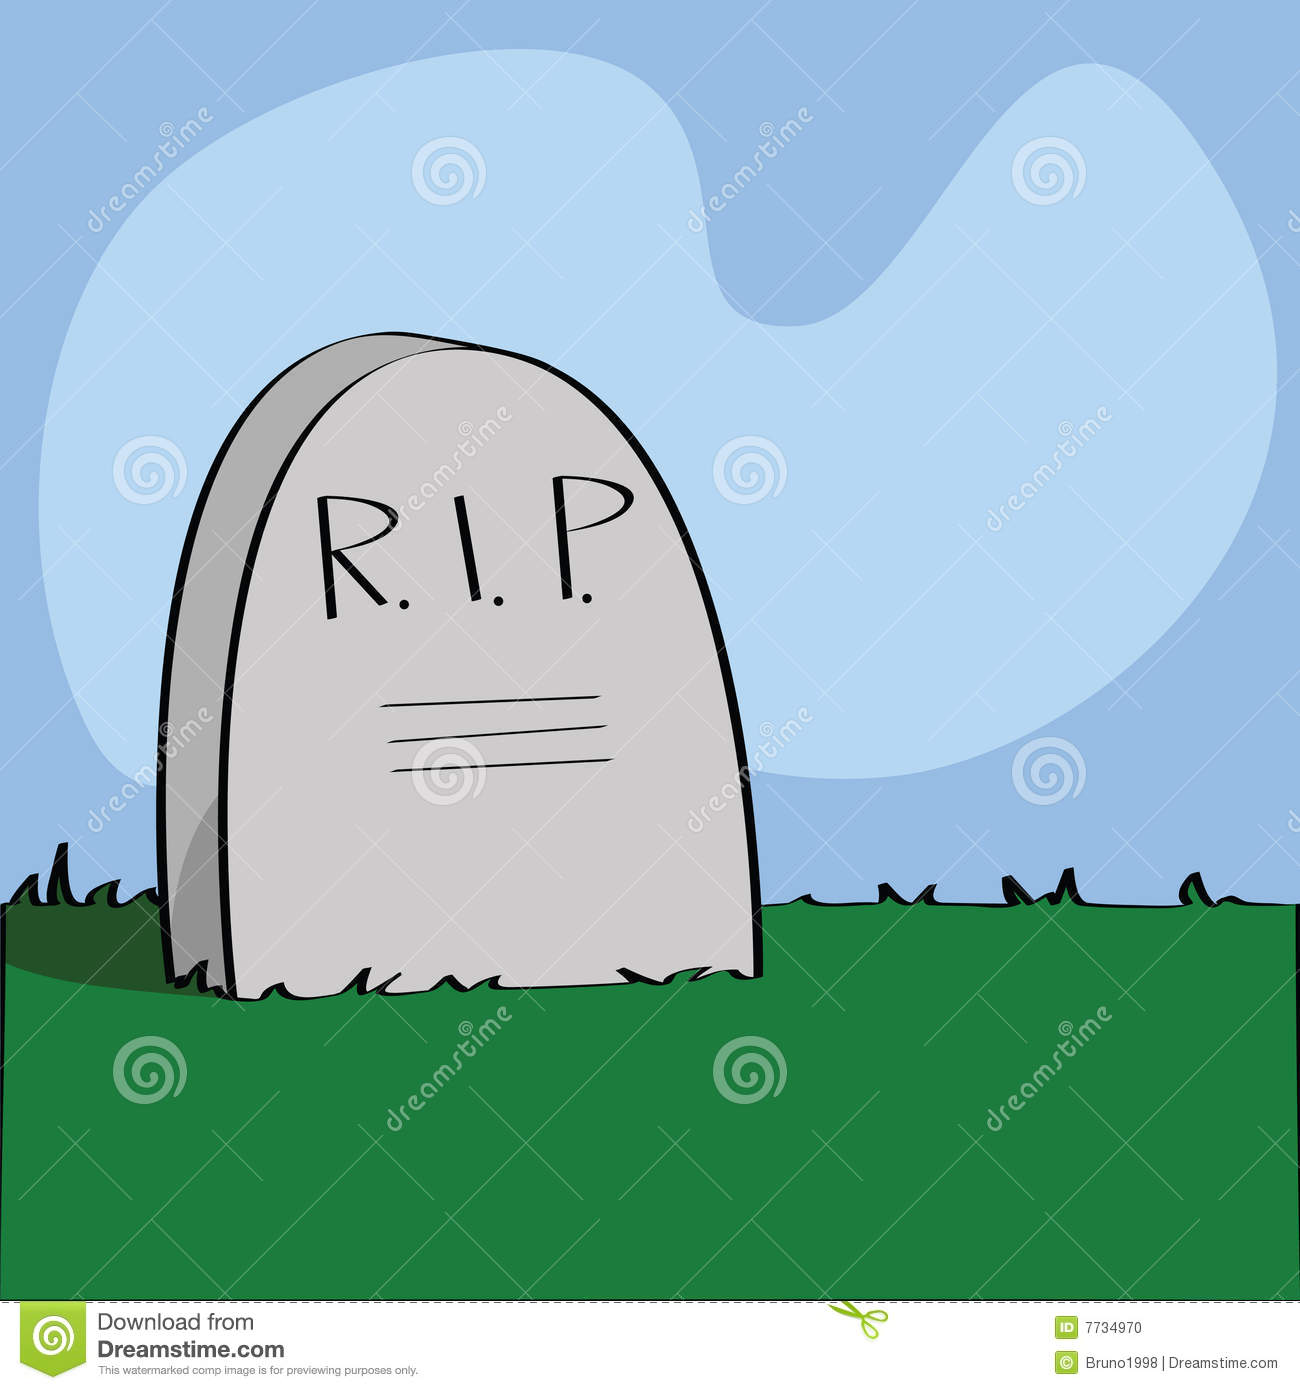 More Similar Stock Images Of   Rest In Peace  